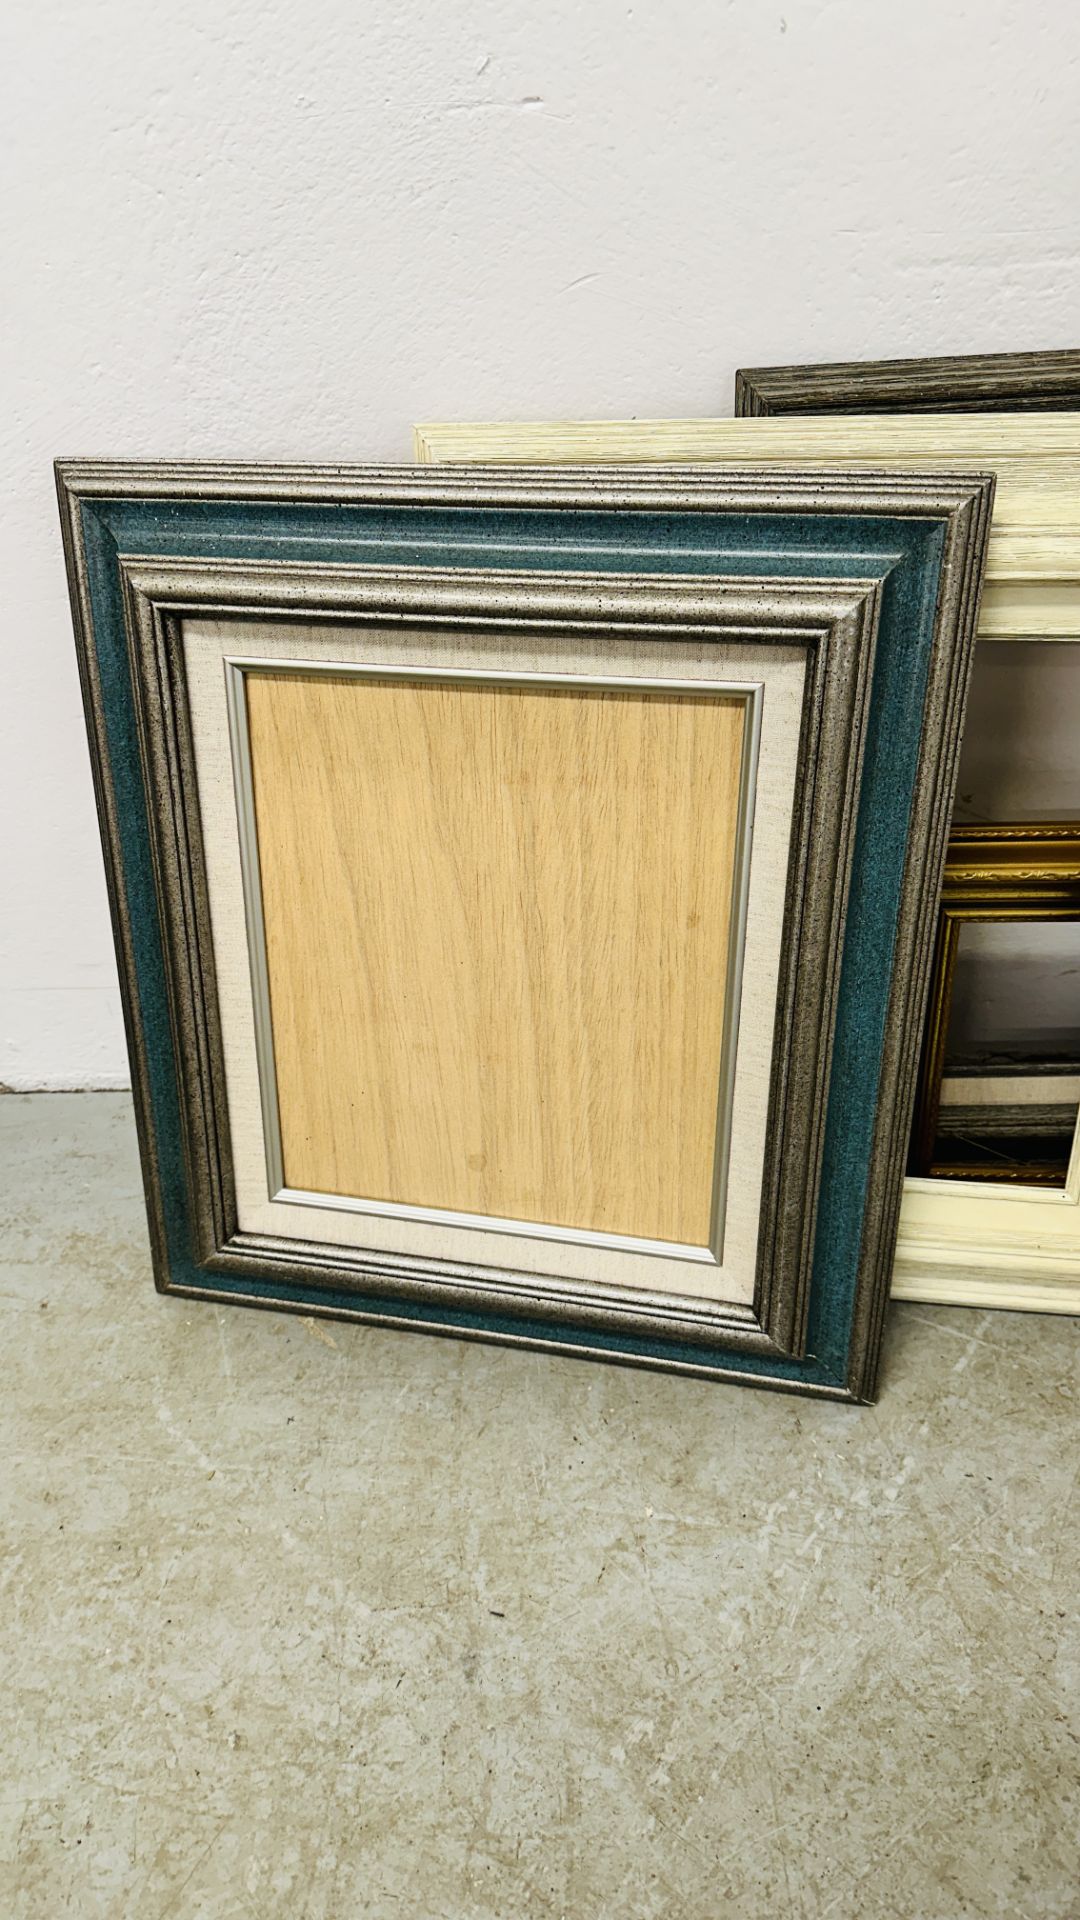 11 PICTURES AND PICTURE FRAMES AVERAGE SIZE, W 49CM X H 44CM. - Image 6 of 7